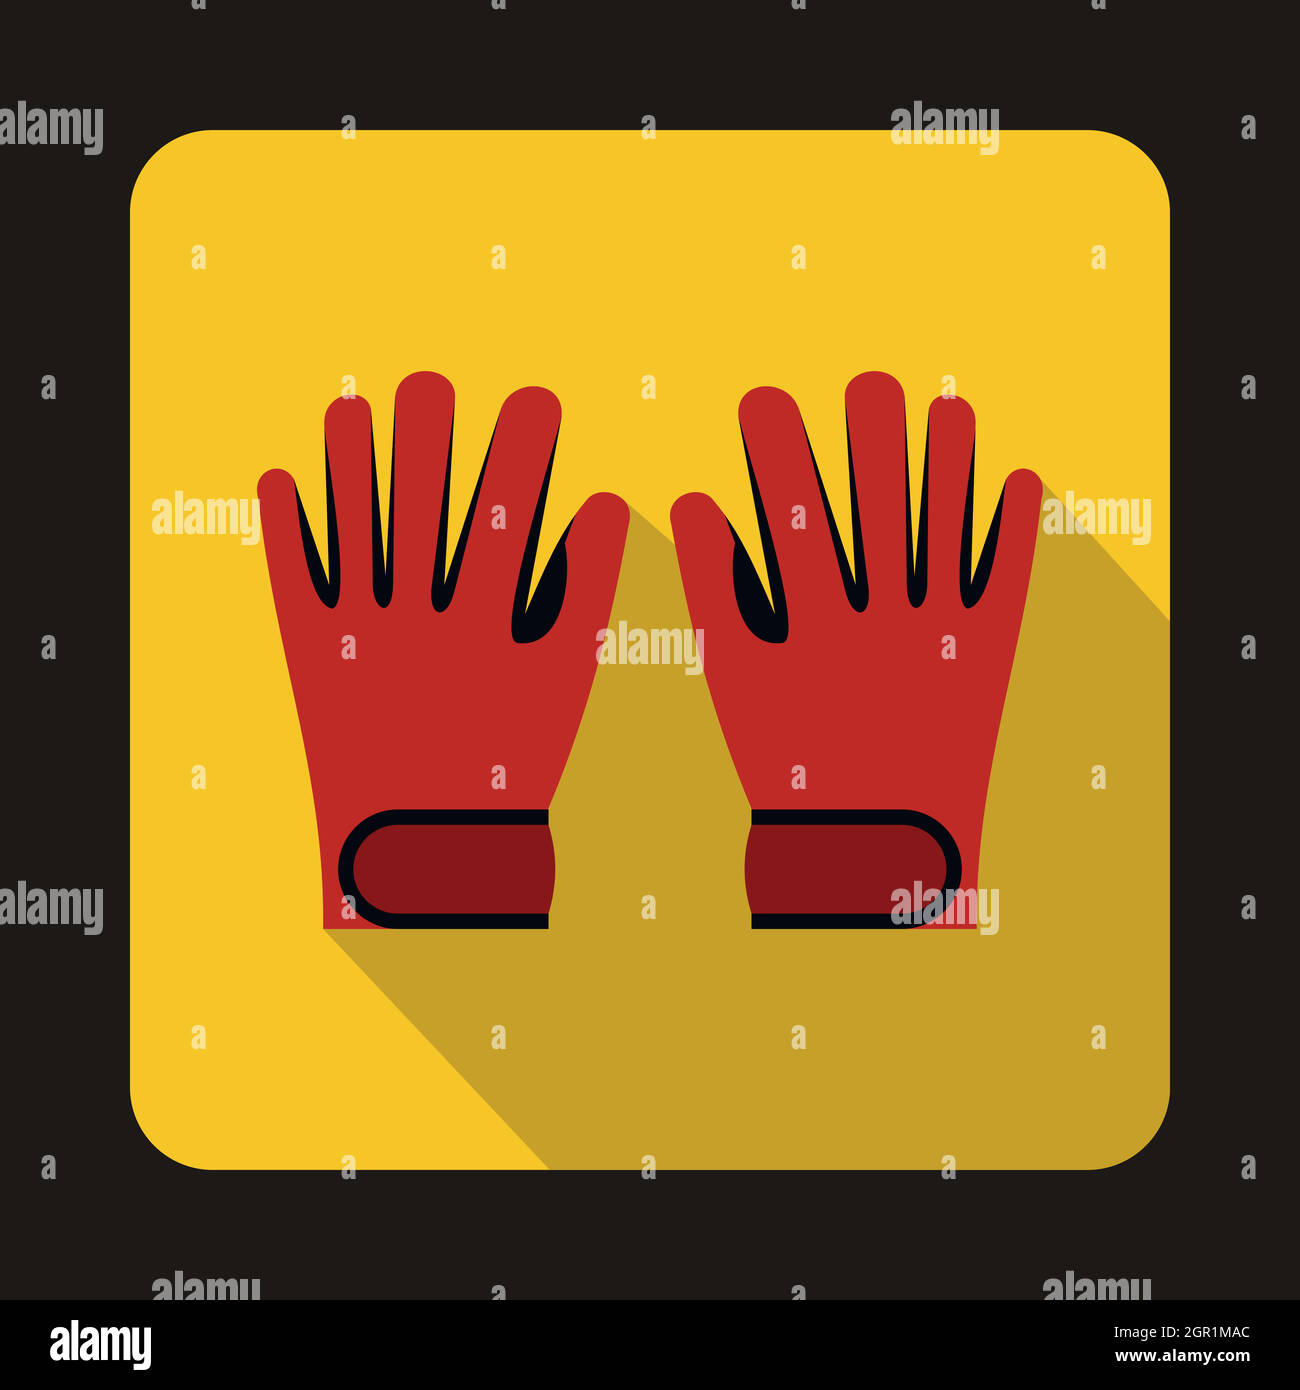 Red winter ski gloves icon, flat style Stock Vector